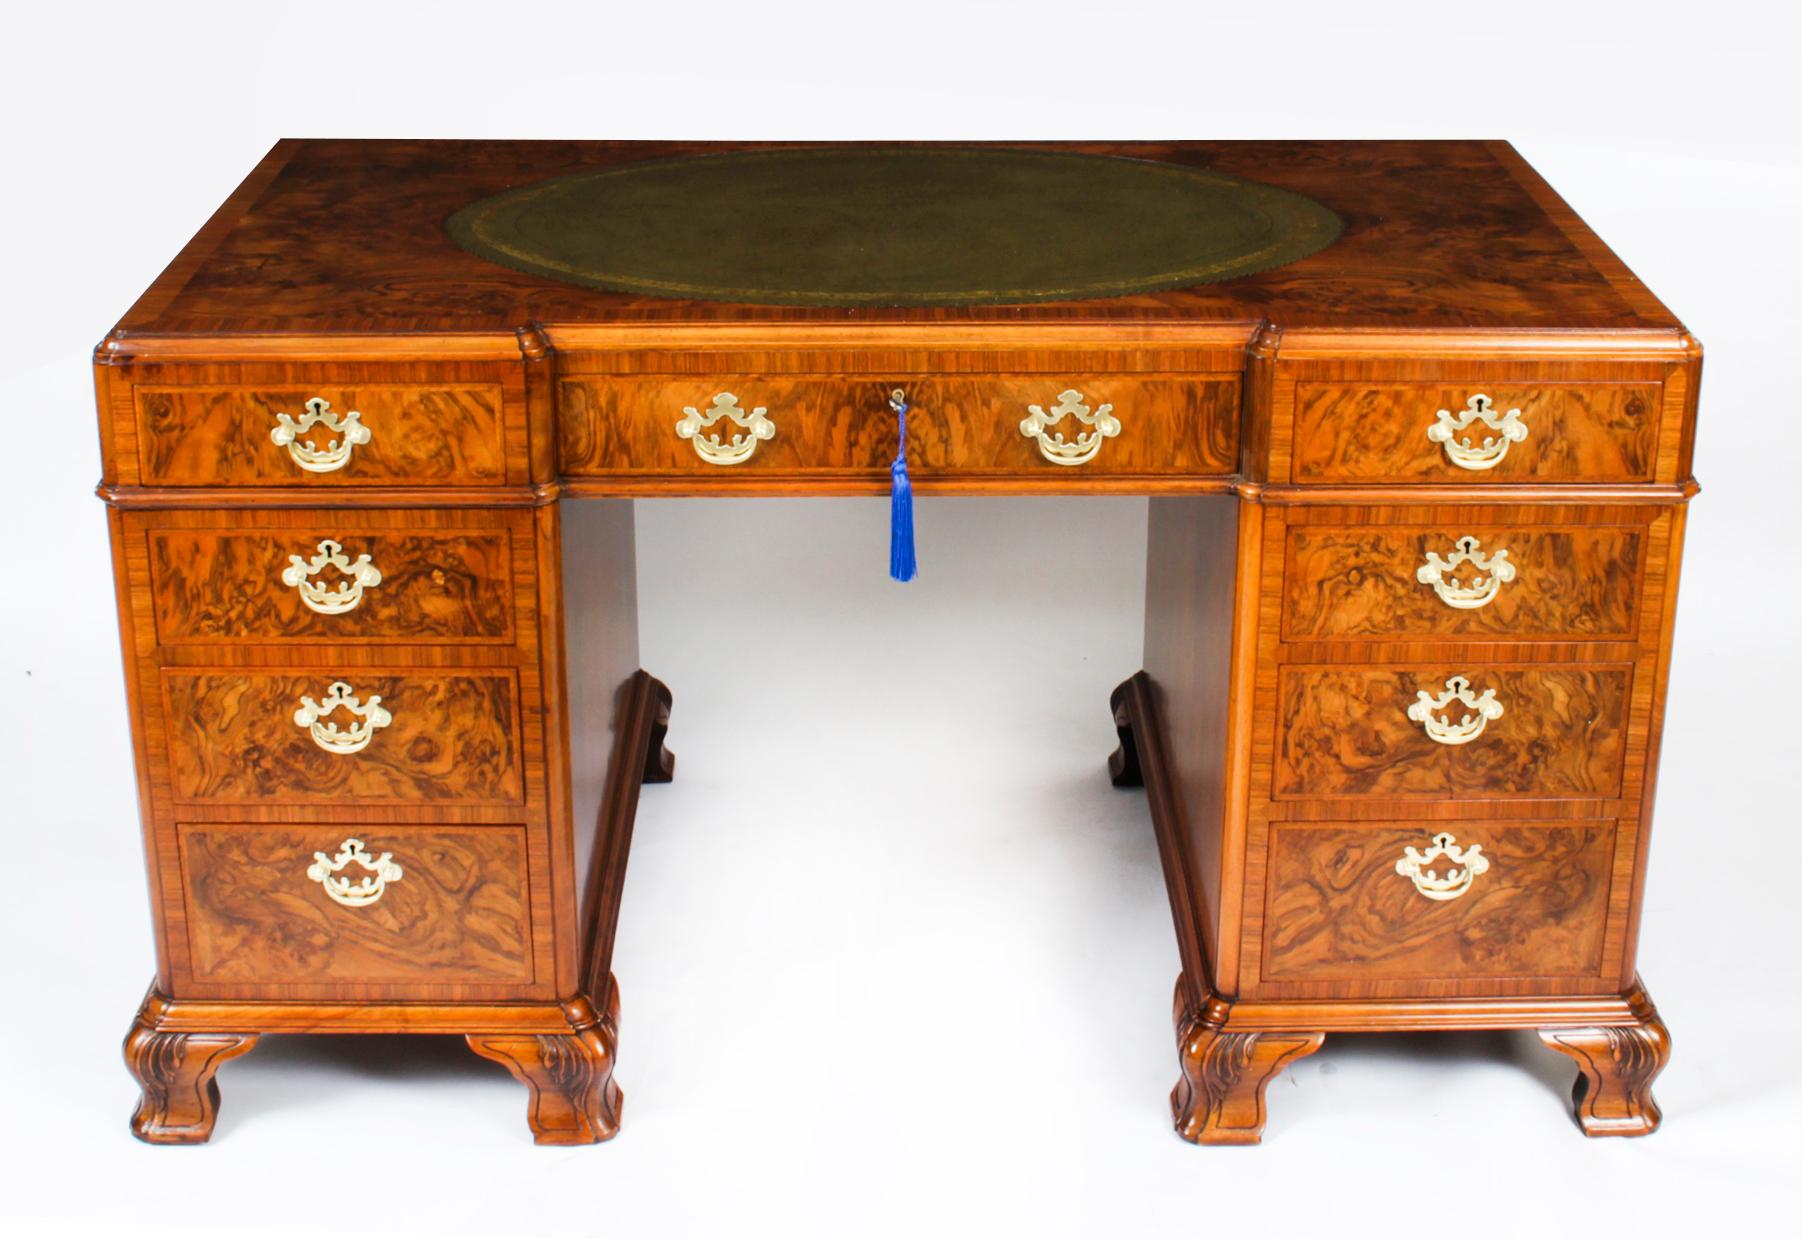 A superb burr figured walnut pedestal desk, dating from the early 20th Century.

Of recessed broken outline, the rectangular top inset with an oval panel of gold tooled green leather, having a wide crossbanded border and a moulded edge with